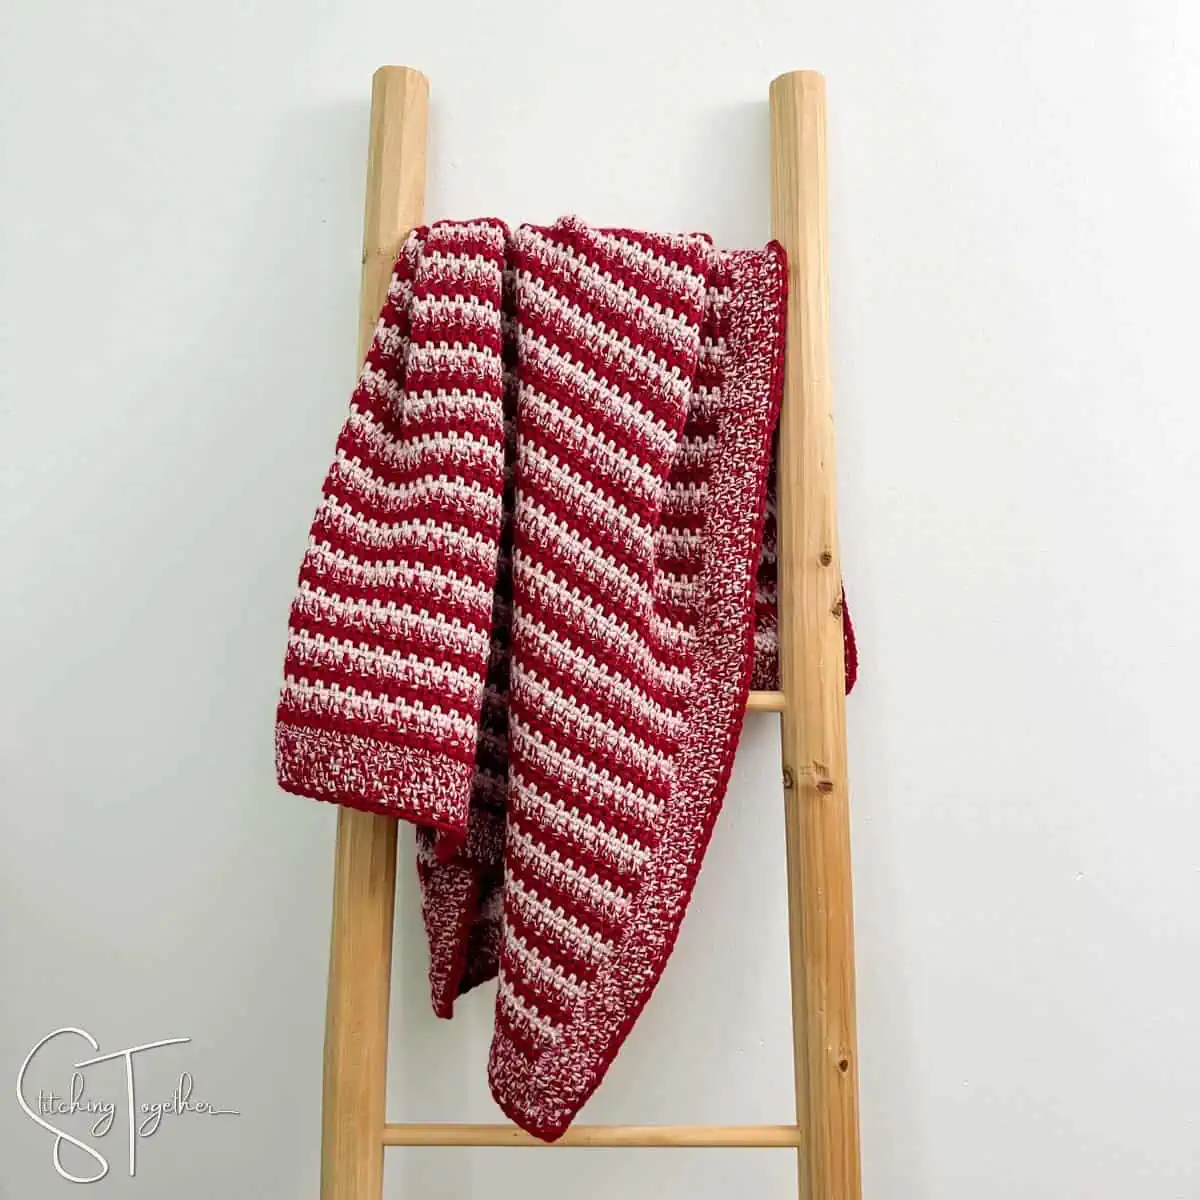 red and pink striped crochet baby blanket draped on a afghan ladder